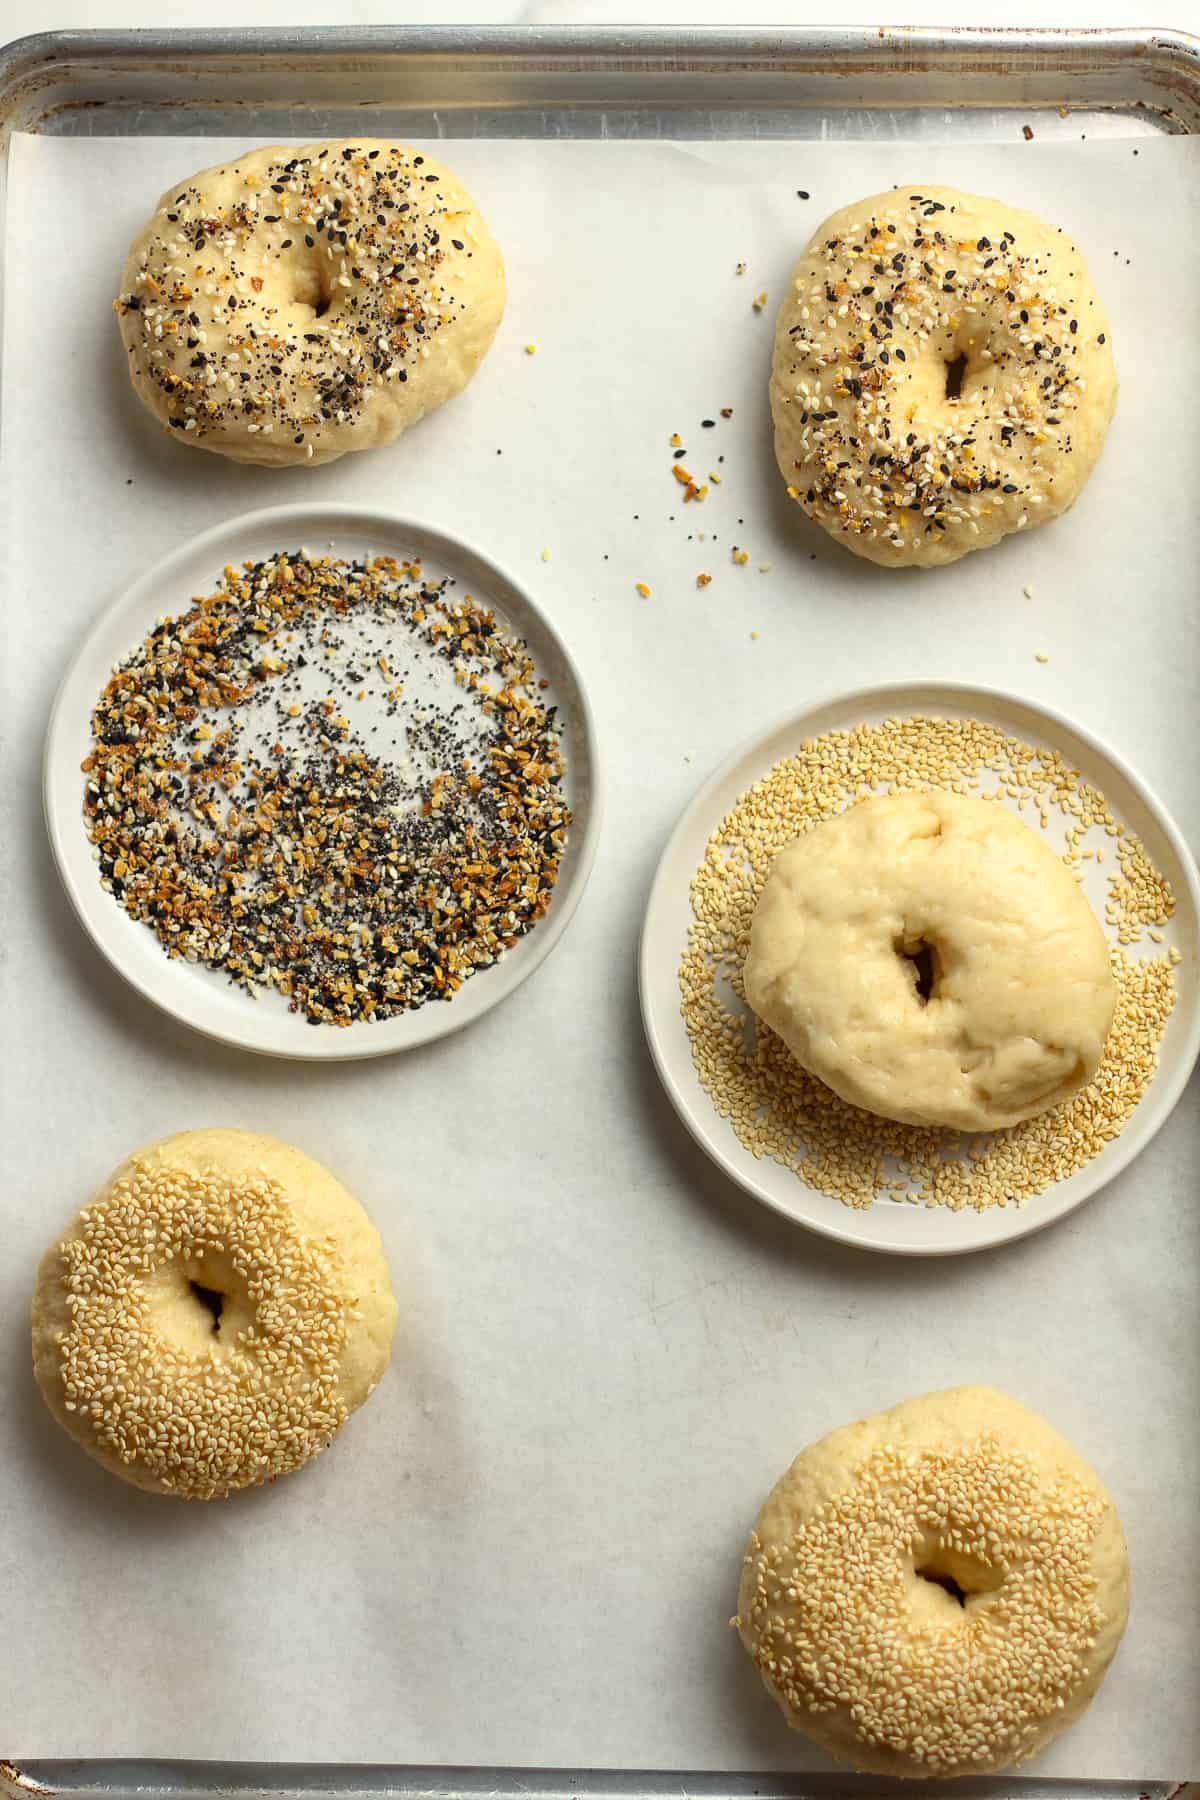 A pan of the bagels showing them dunked in toppings.